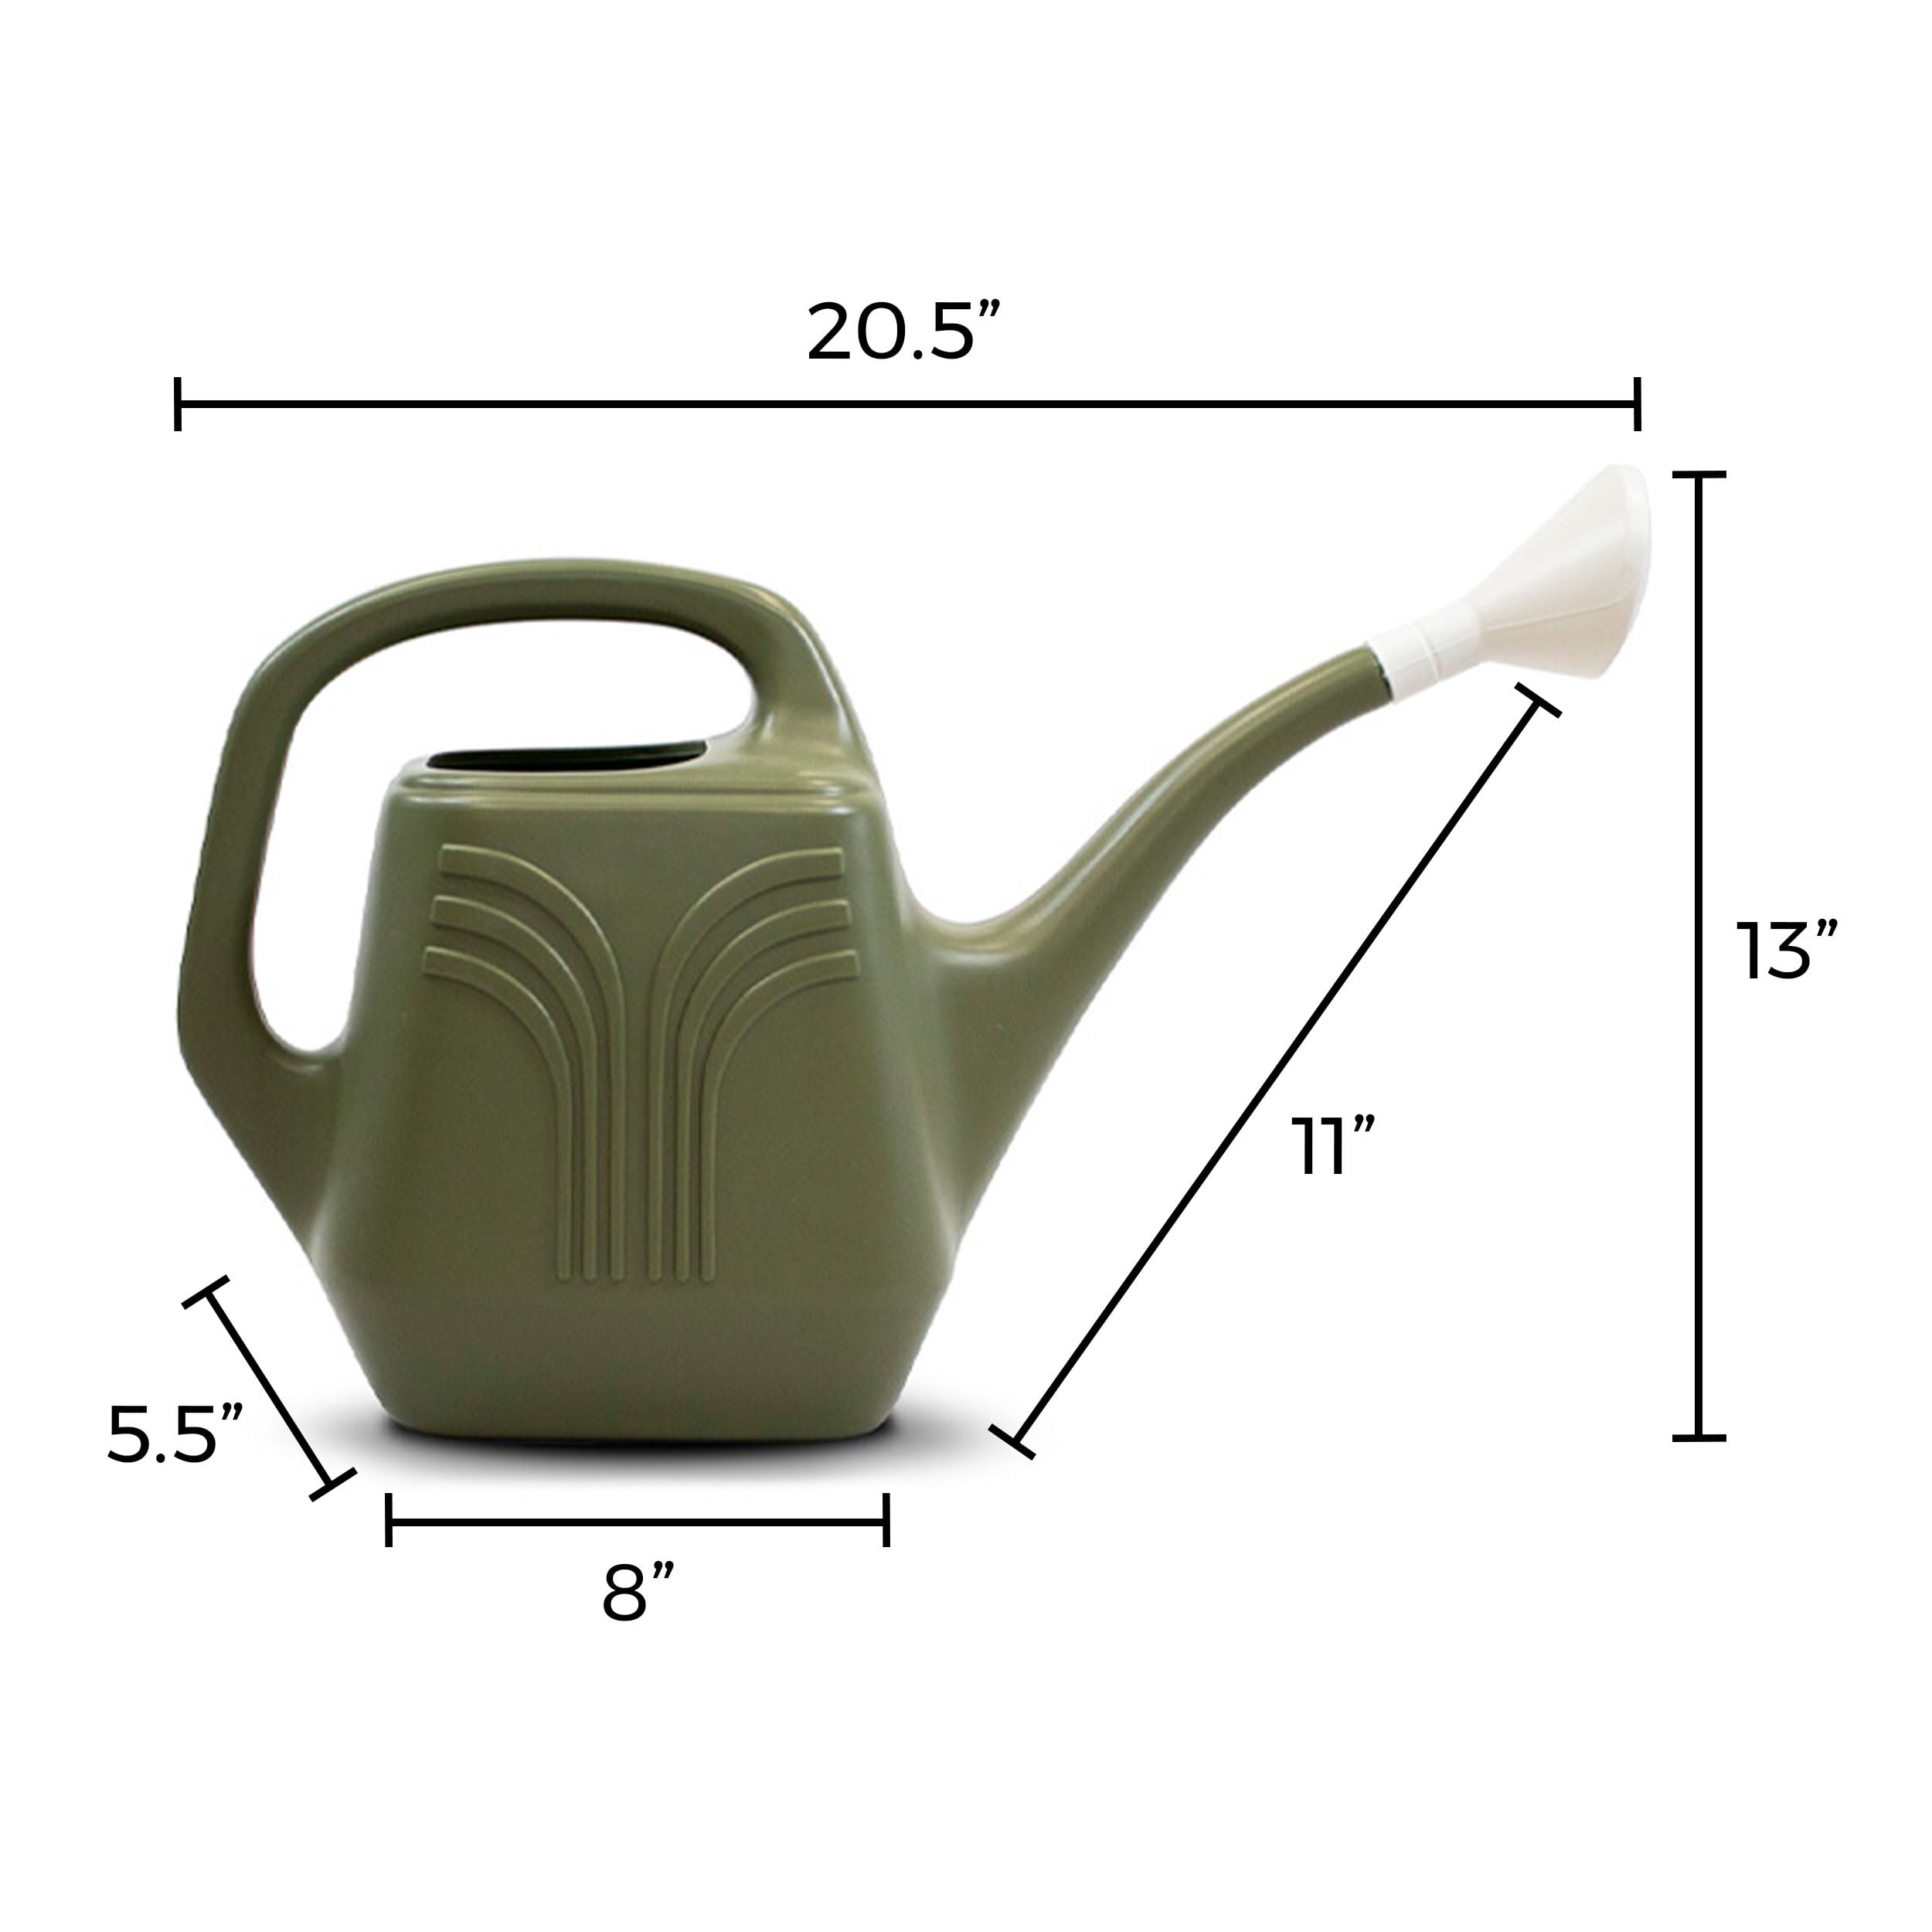 UFANME Watering Can-Plastic 0.8 Gallon,Green 